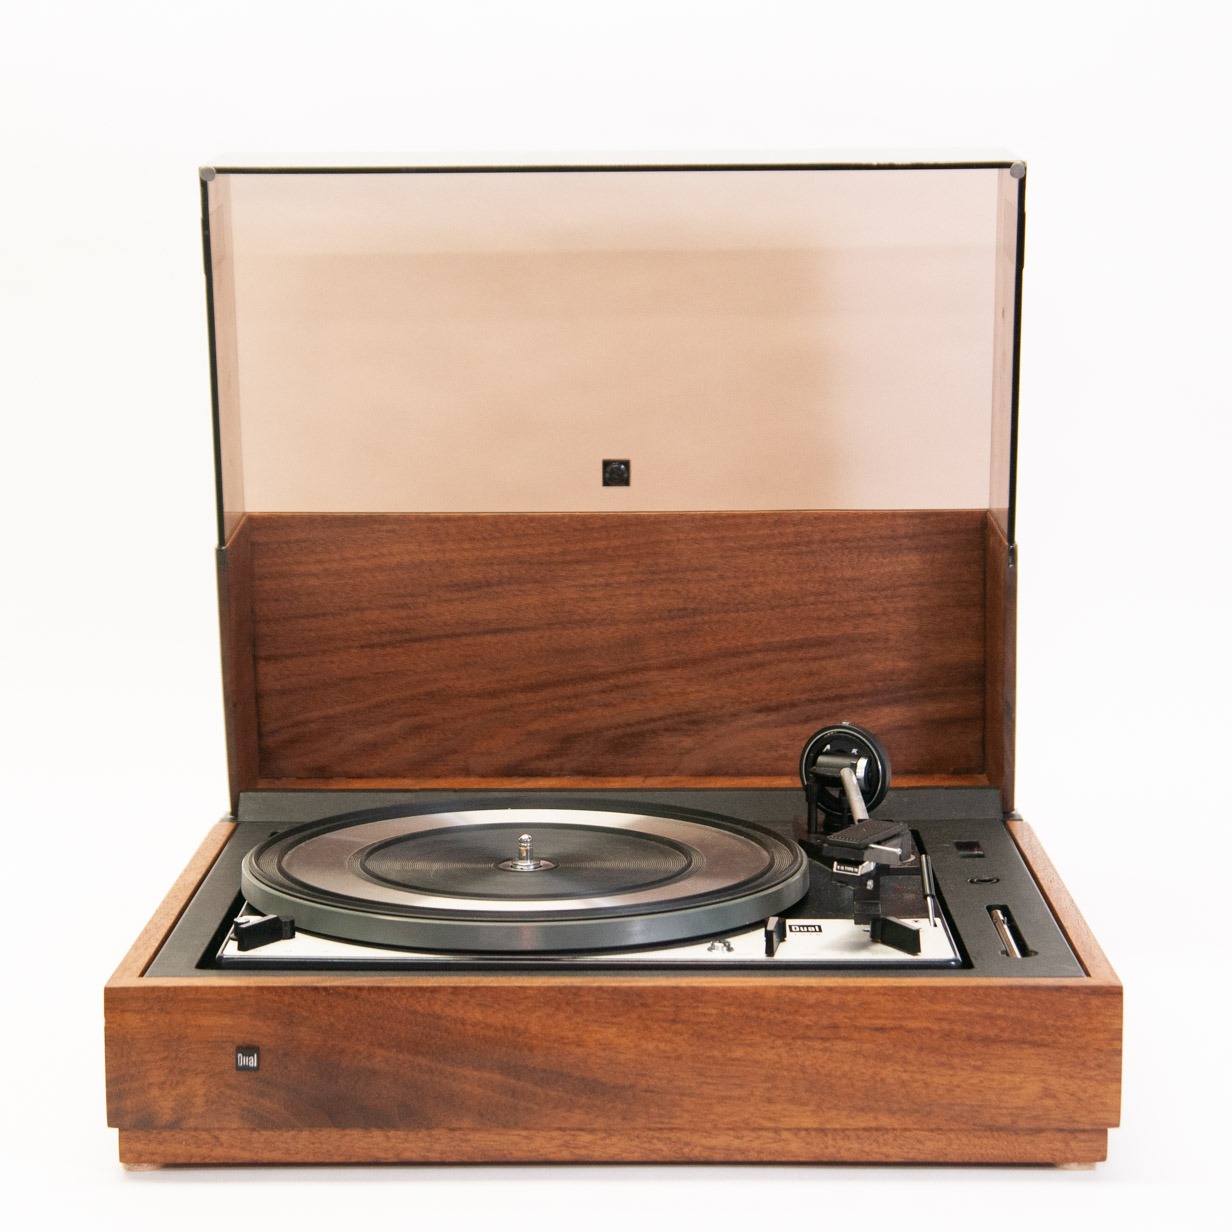 Dual turntable in walnut base, shown with dustcover raised